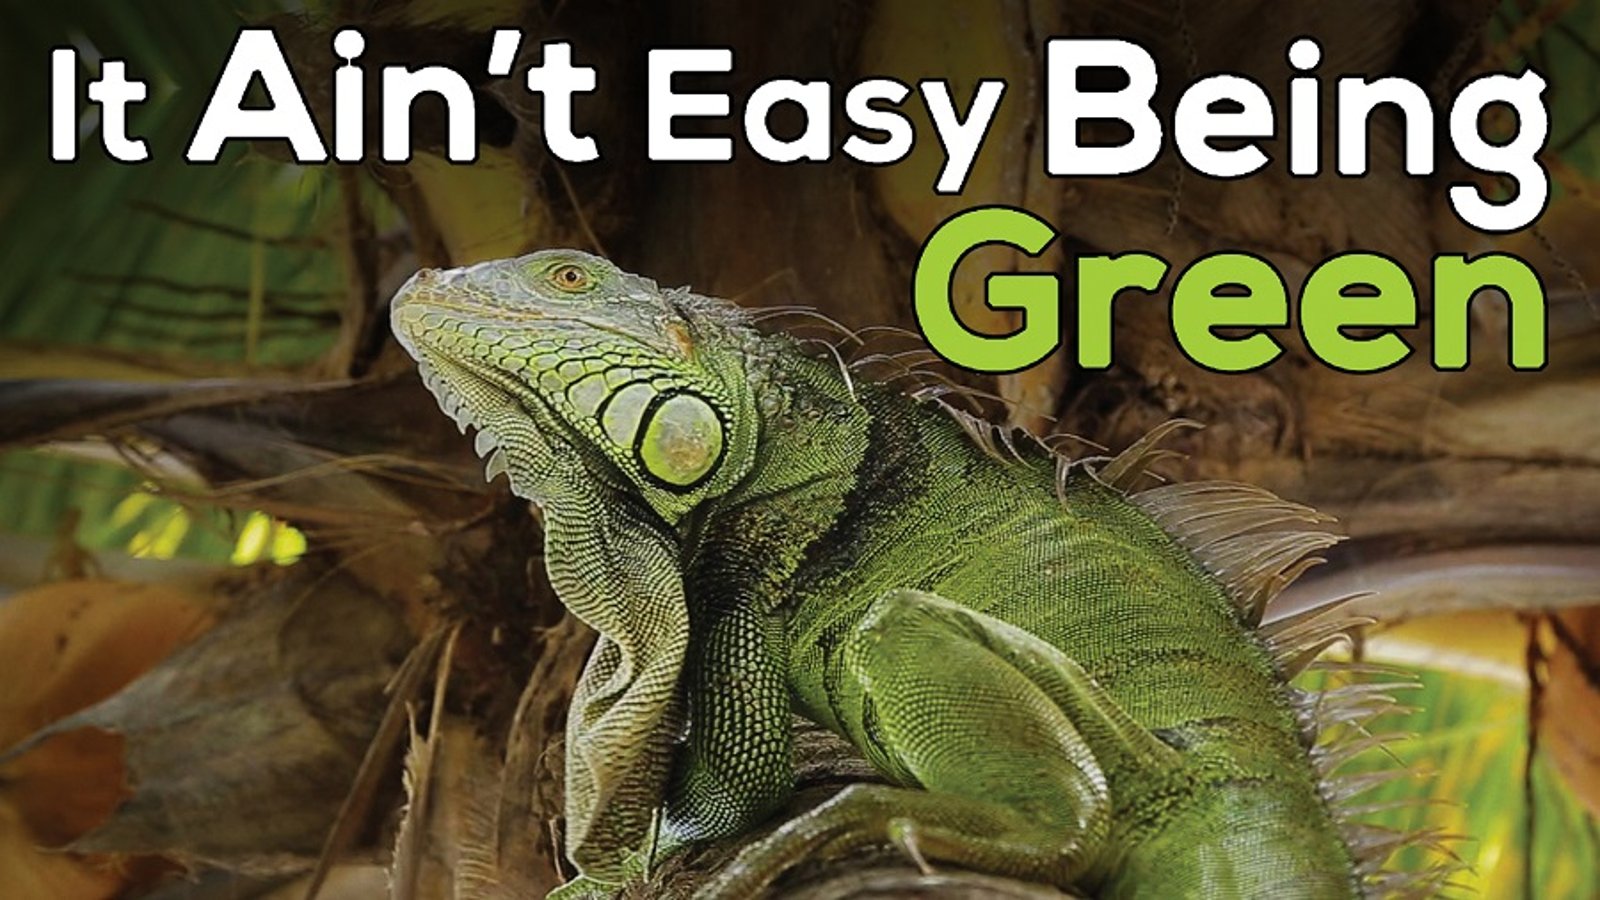 It Ain't Easy Being Green - Iguana Population Growth in the Caribbean